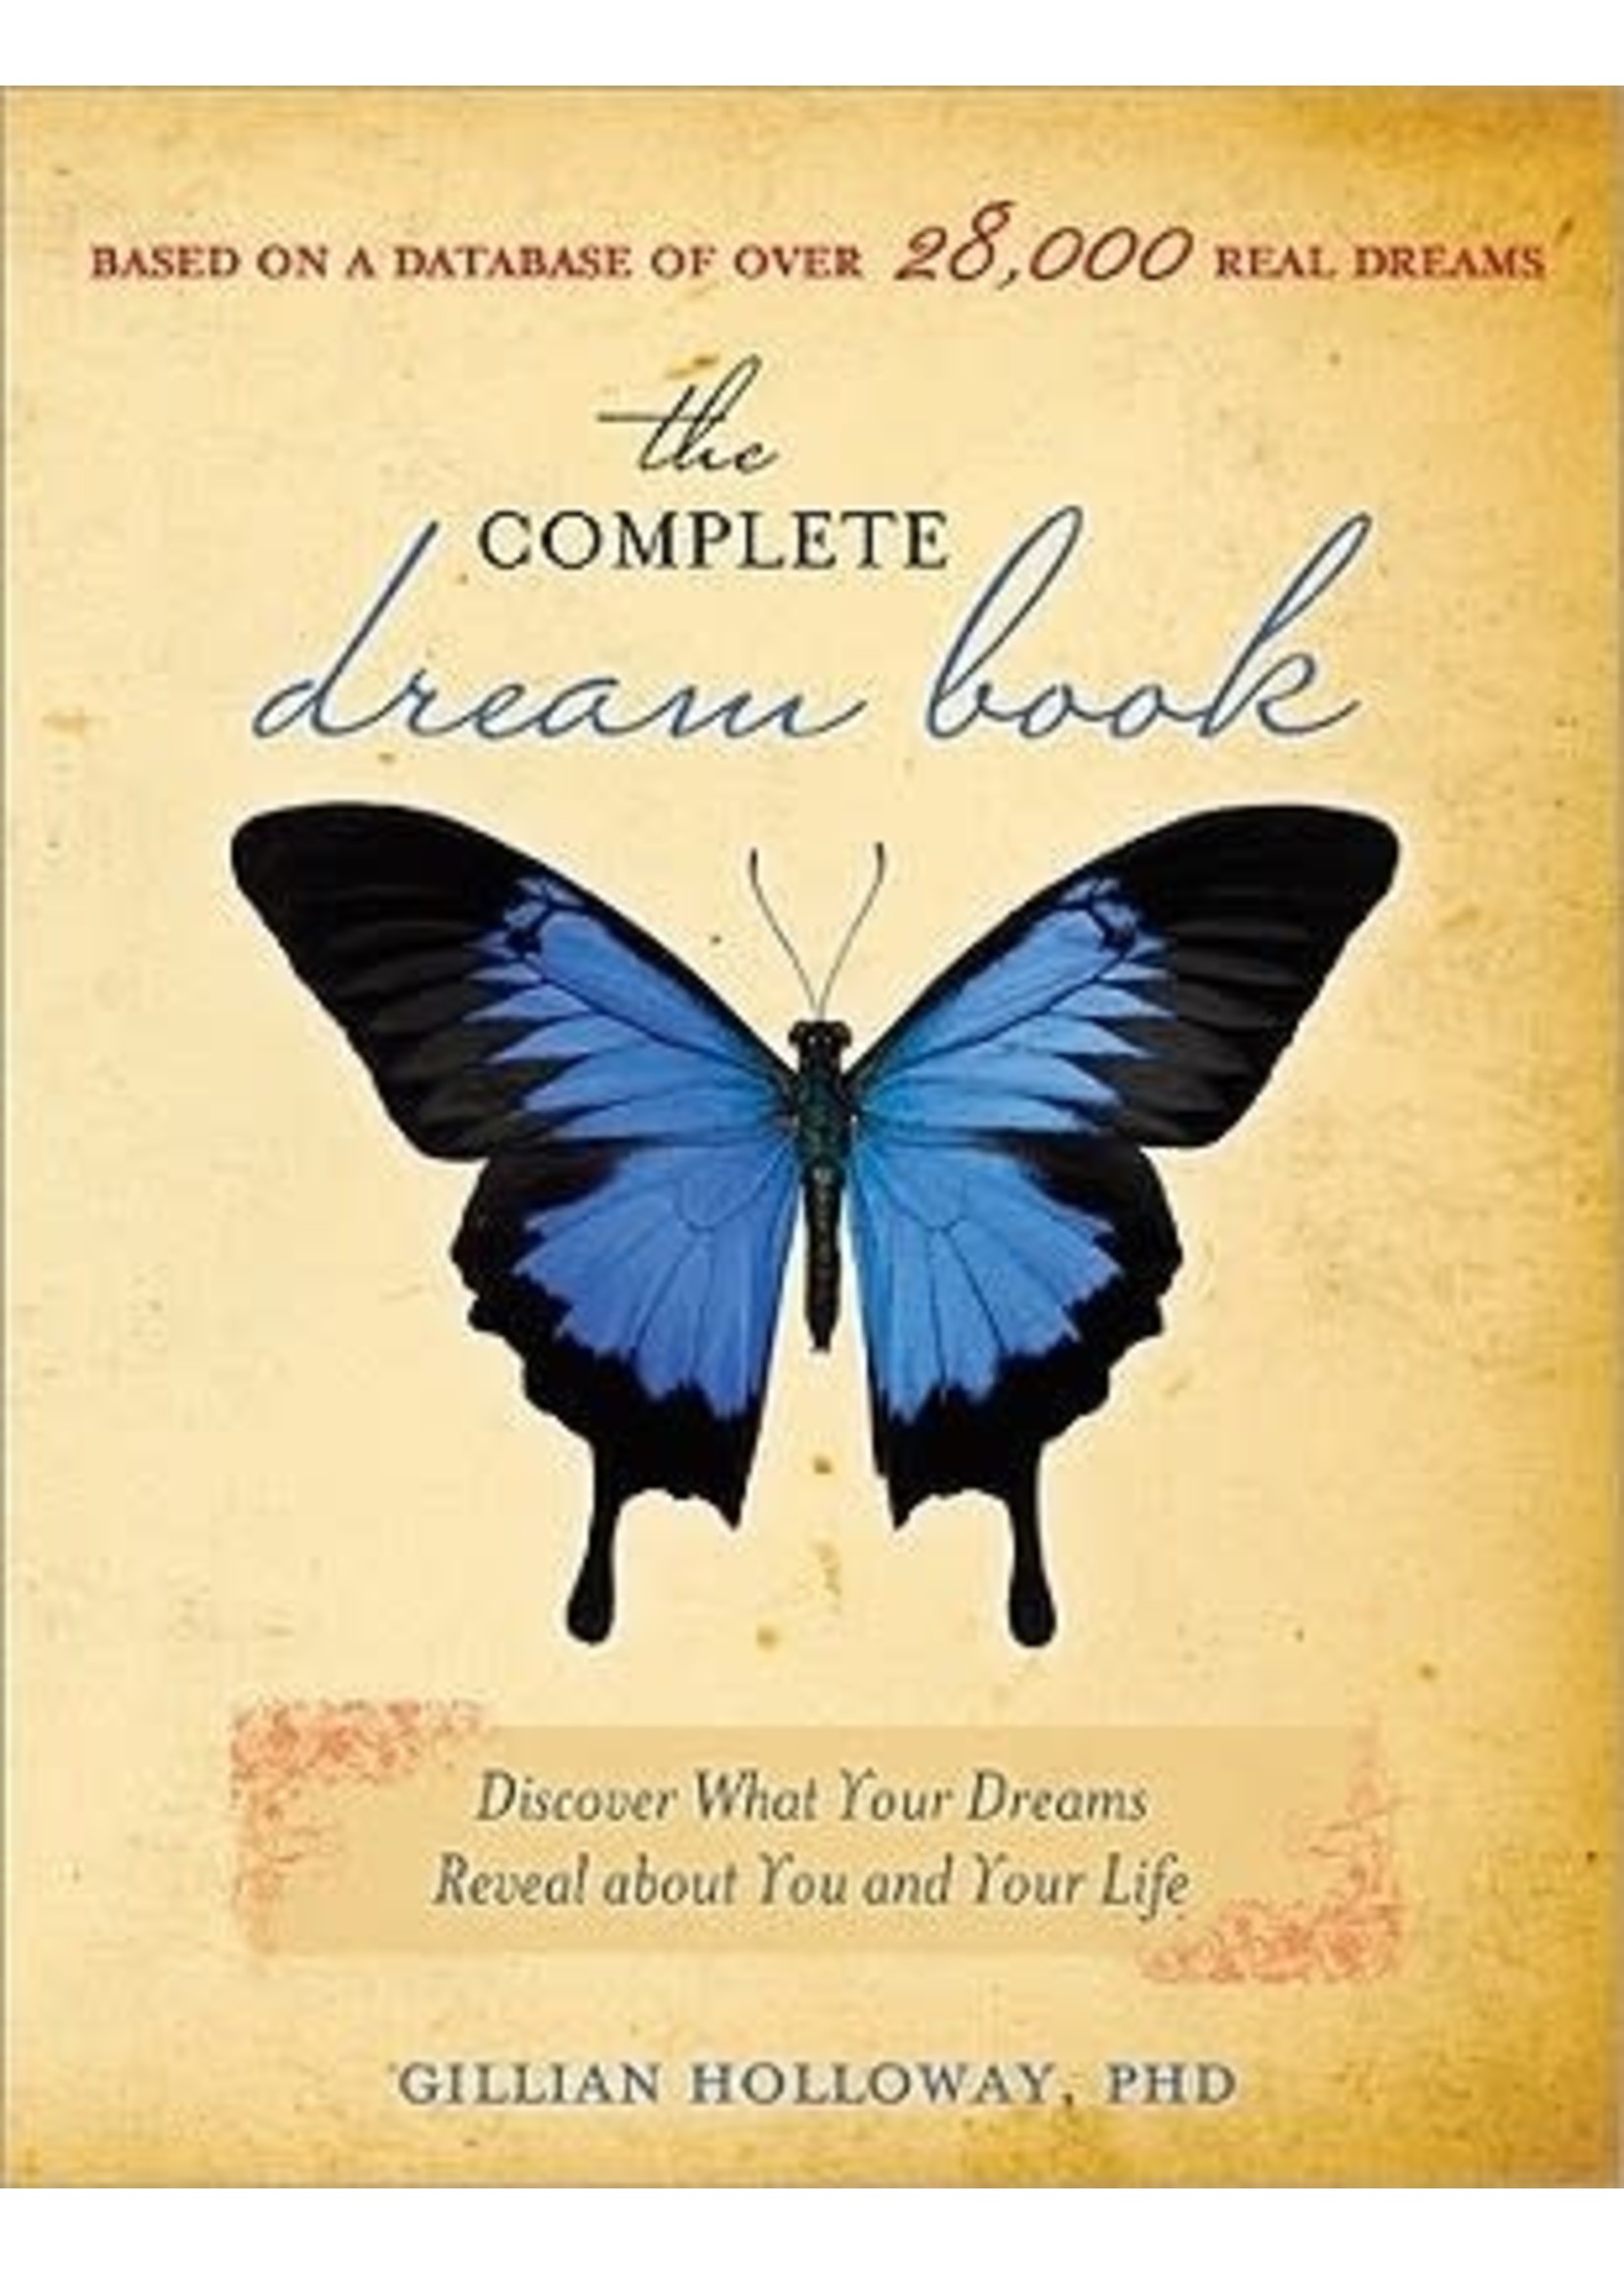 The Complete Dream Book: Discover What Your Dreams Reveal about You and Your Life by Gillian Holloway